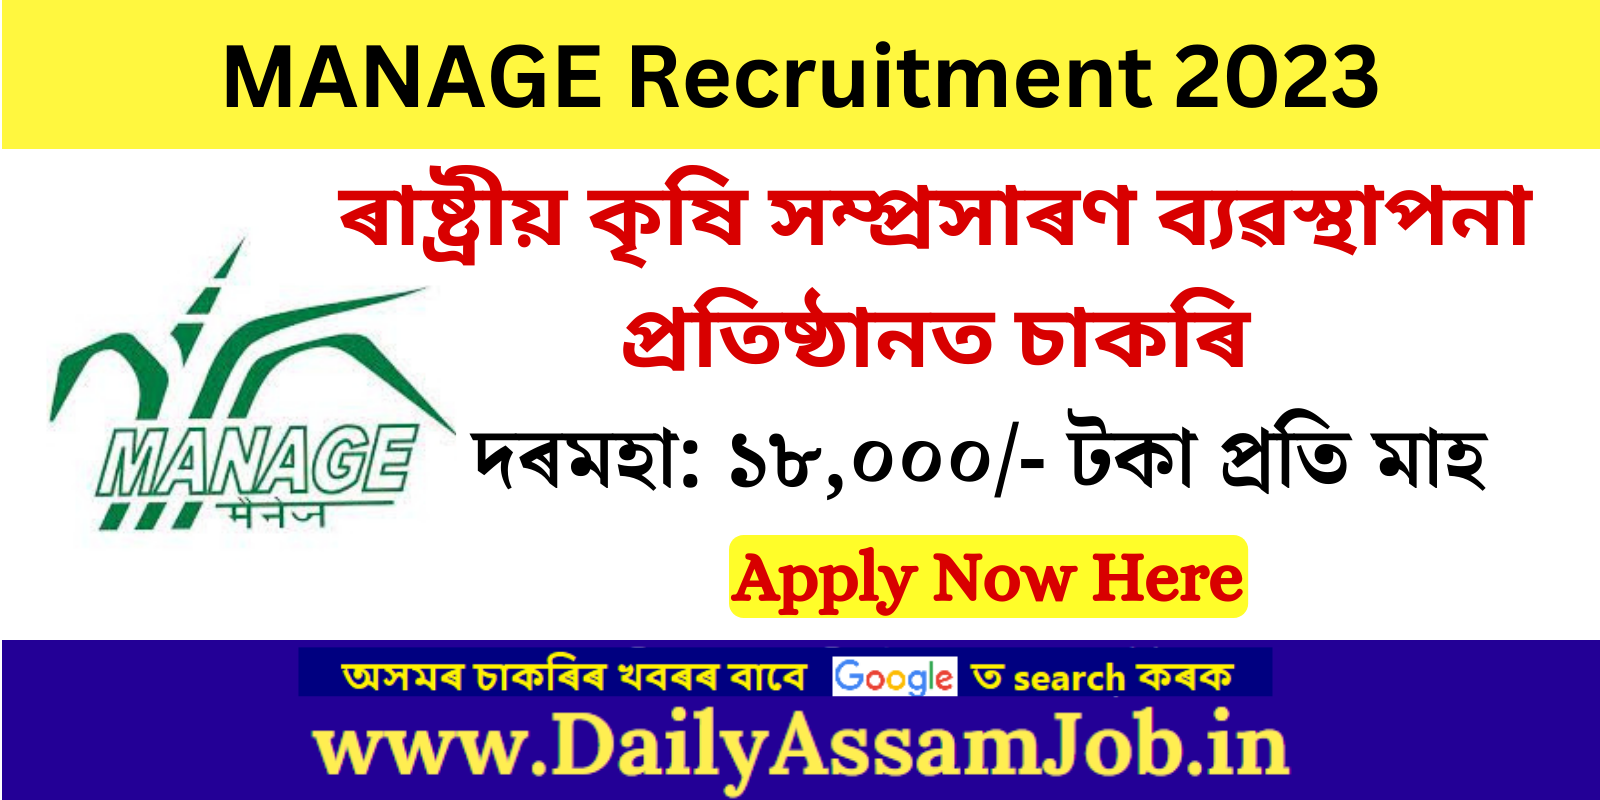 Assam Career :: MANAGE Recruitment 2023 for Assistant, Clerk, MTS & Other Vacancy